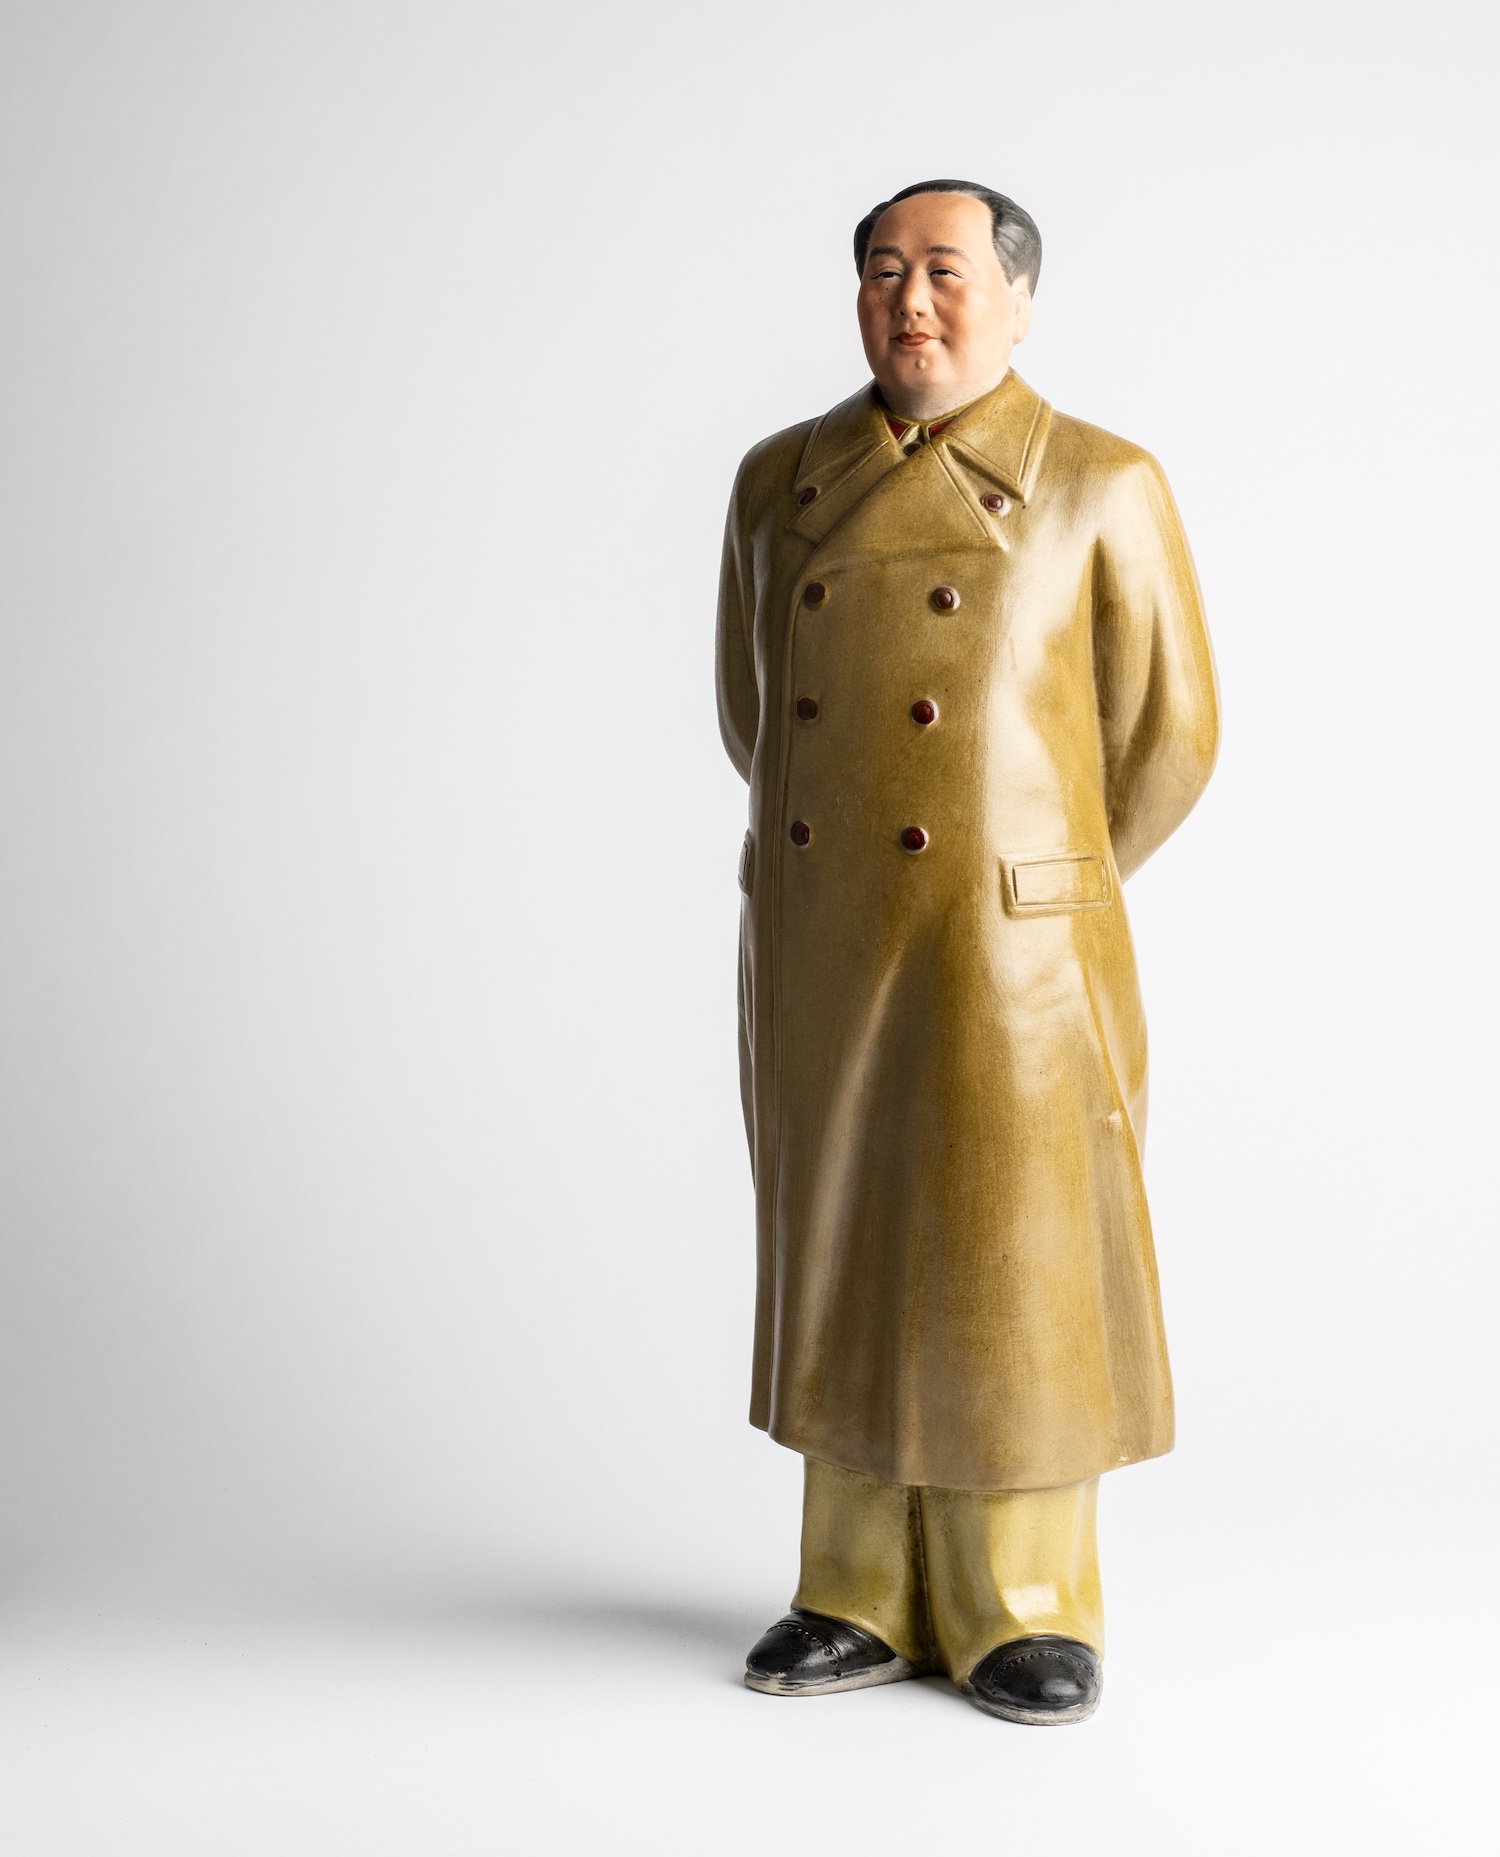 A Chinese porcelain figure of Chairman Mao